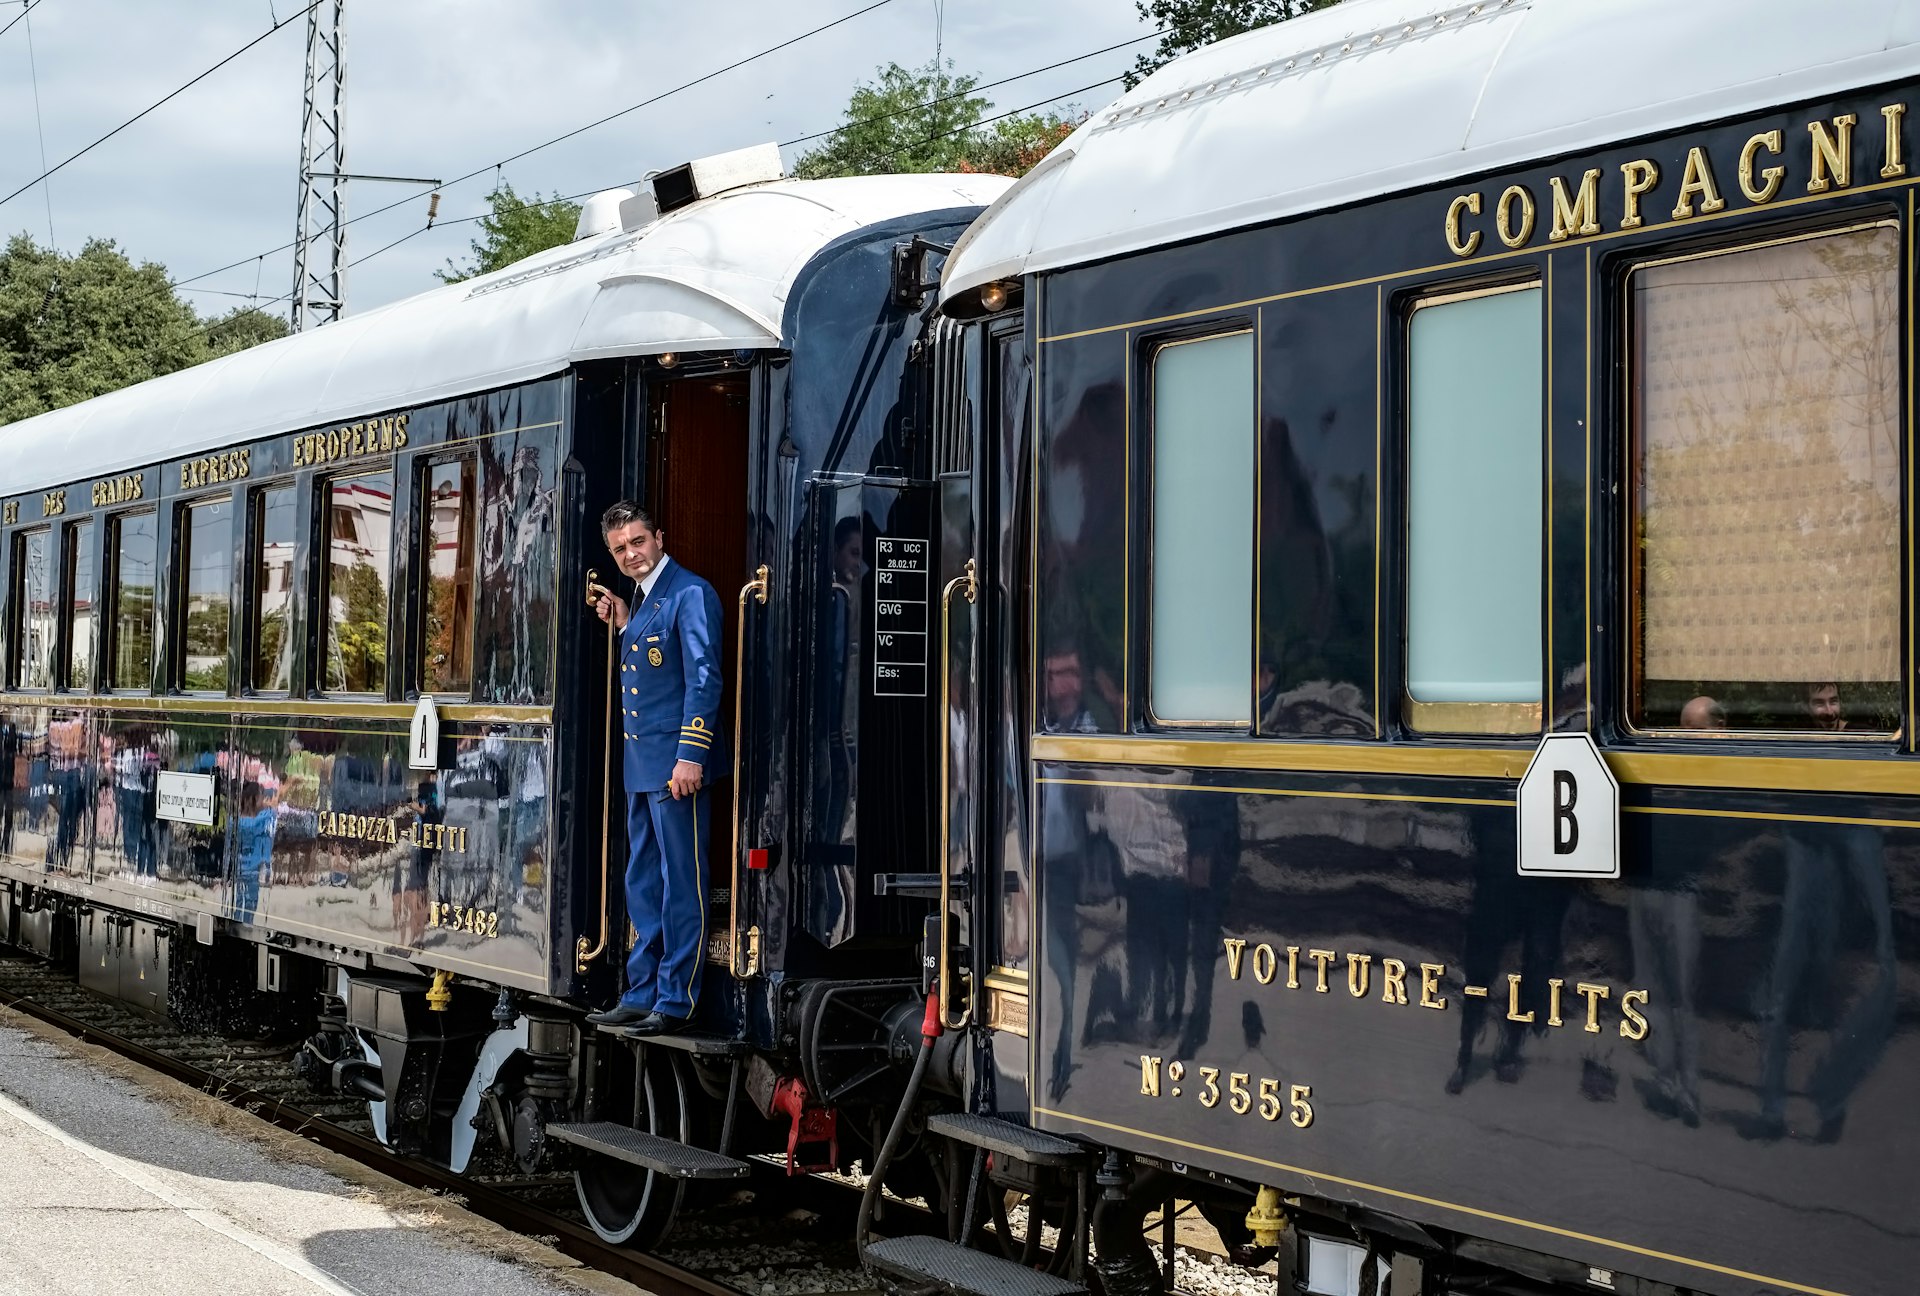 Orient Express: Inside the revamped legendary train - Lonely Planet